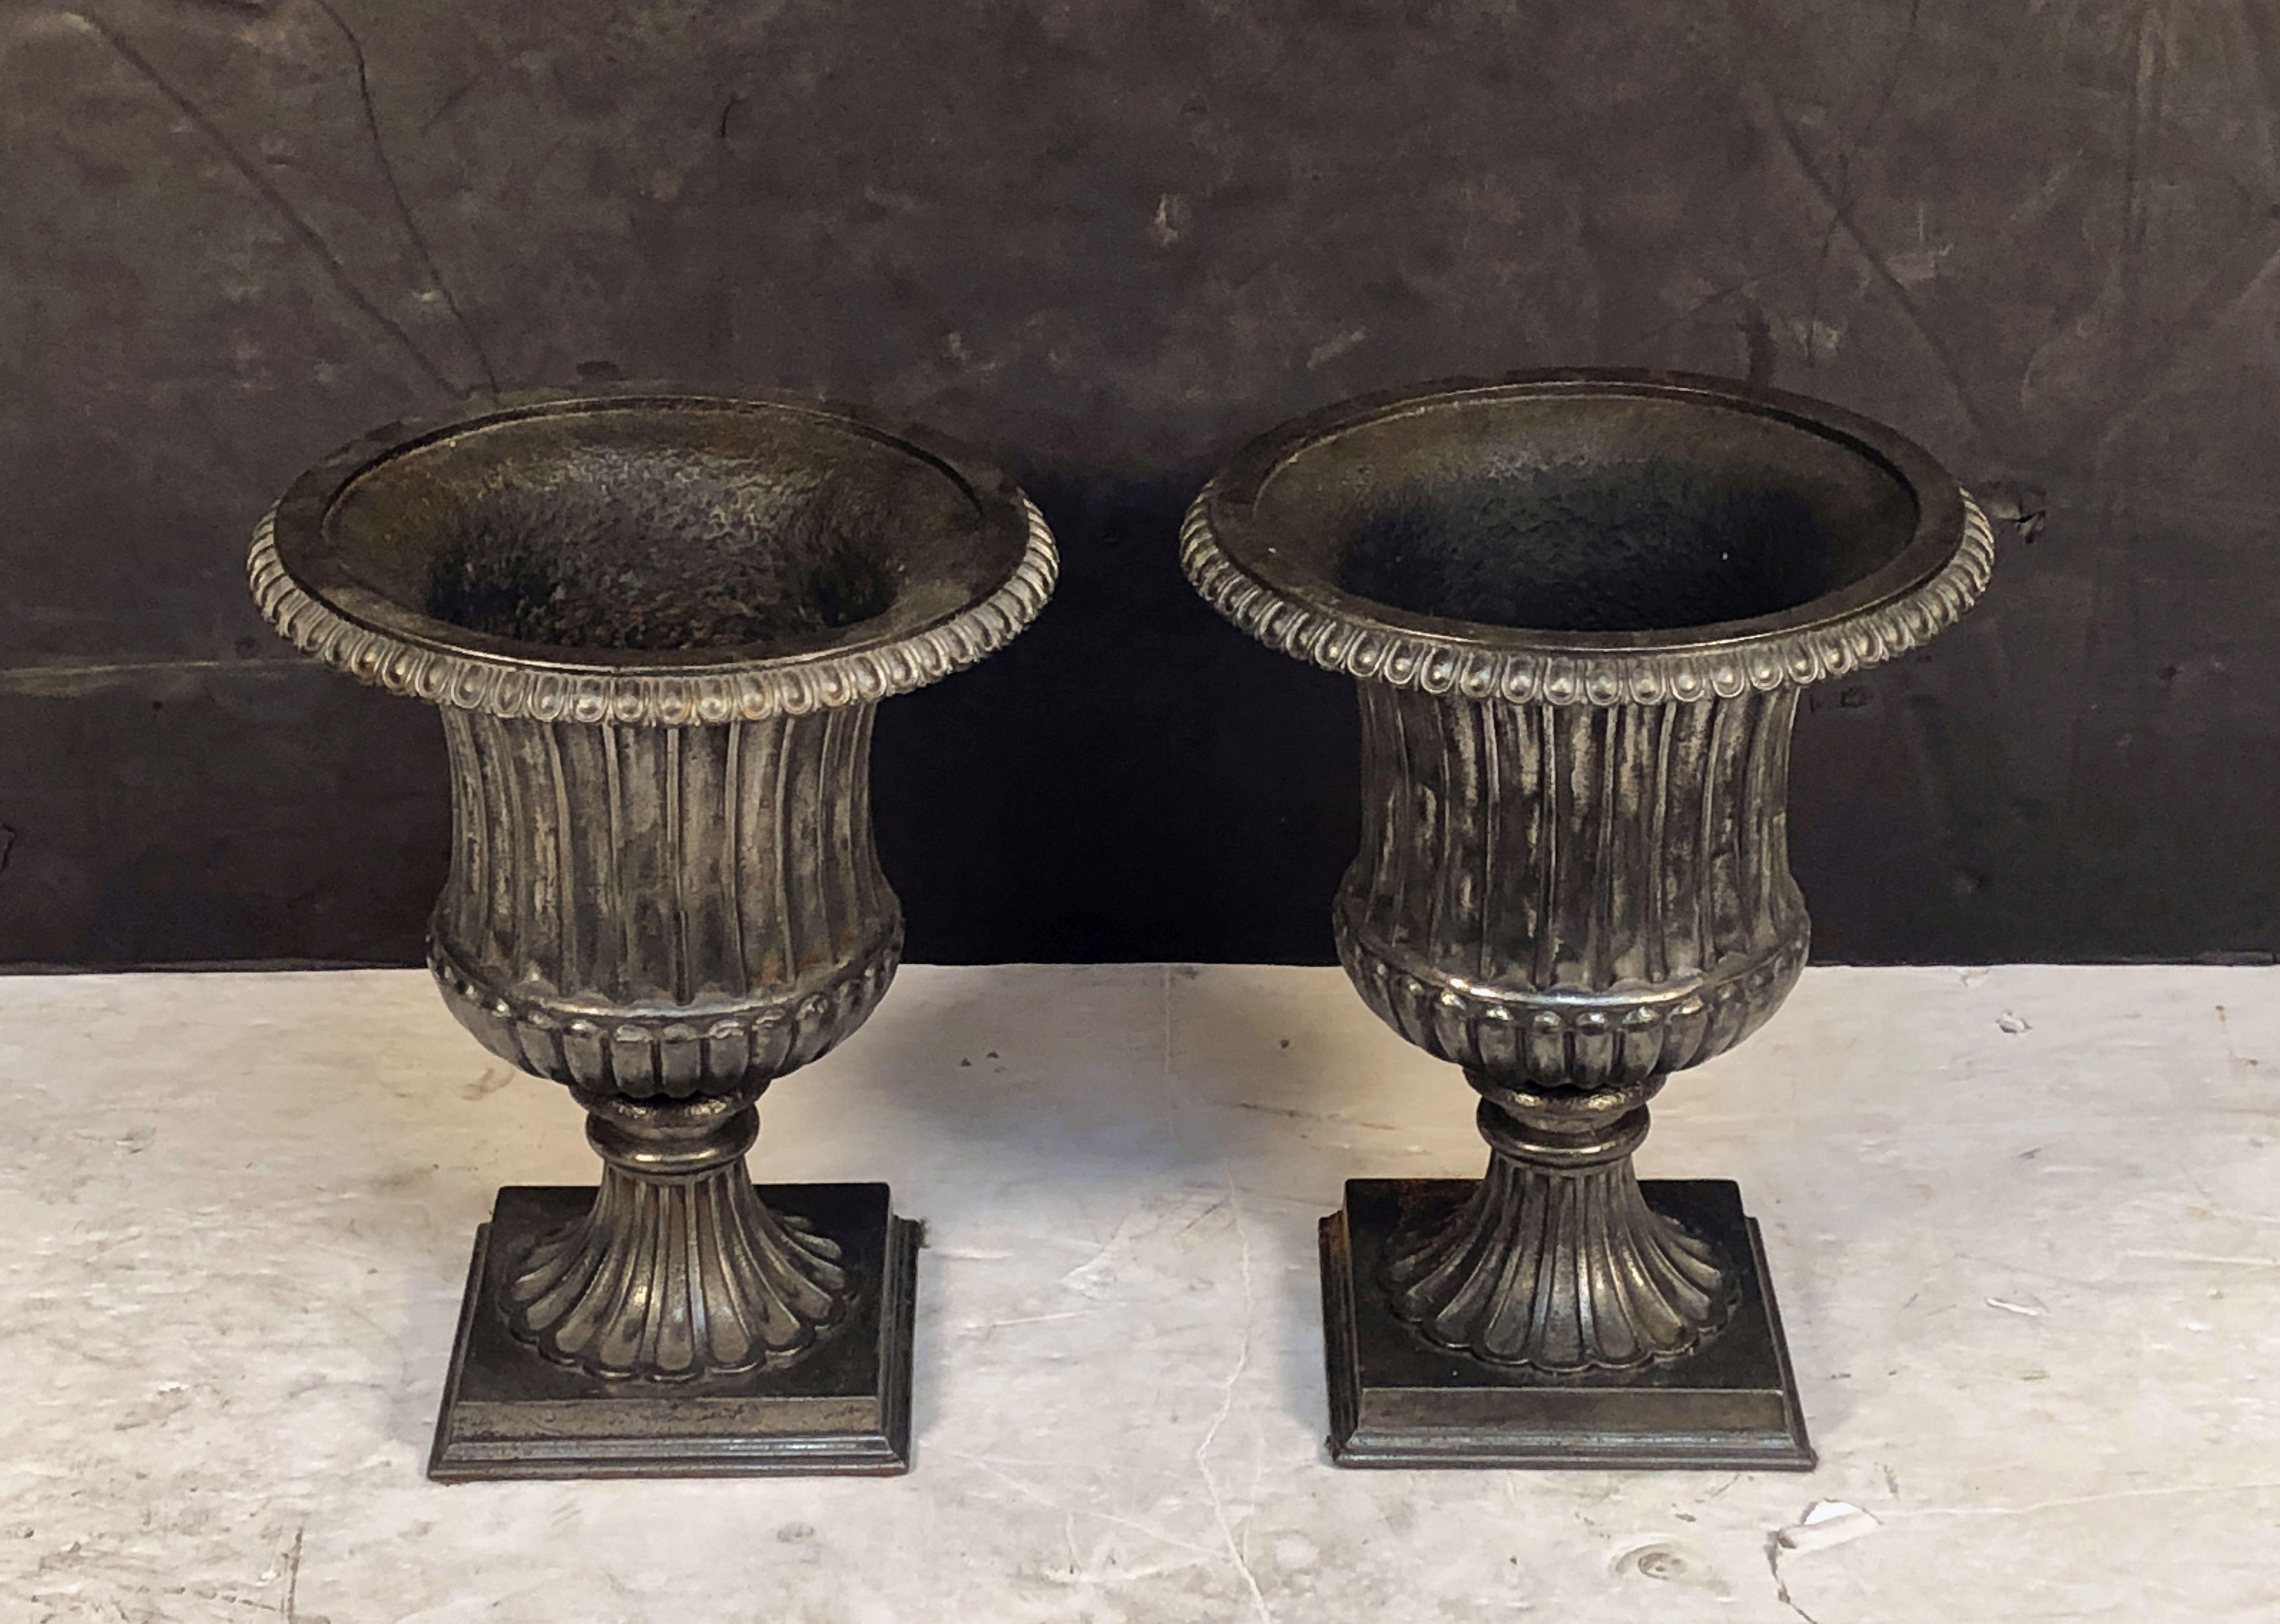 Classical Roman English Garden Urns of Cast Iron with Pewter Finish, 'Individually Priced'